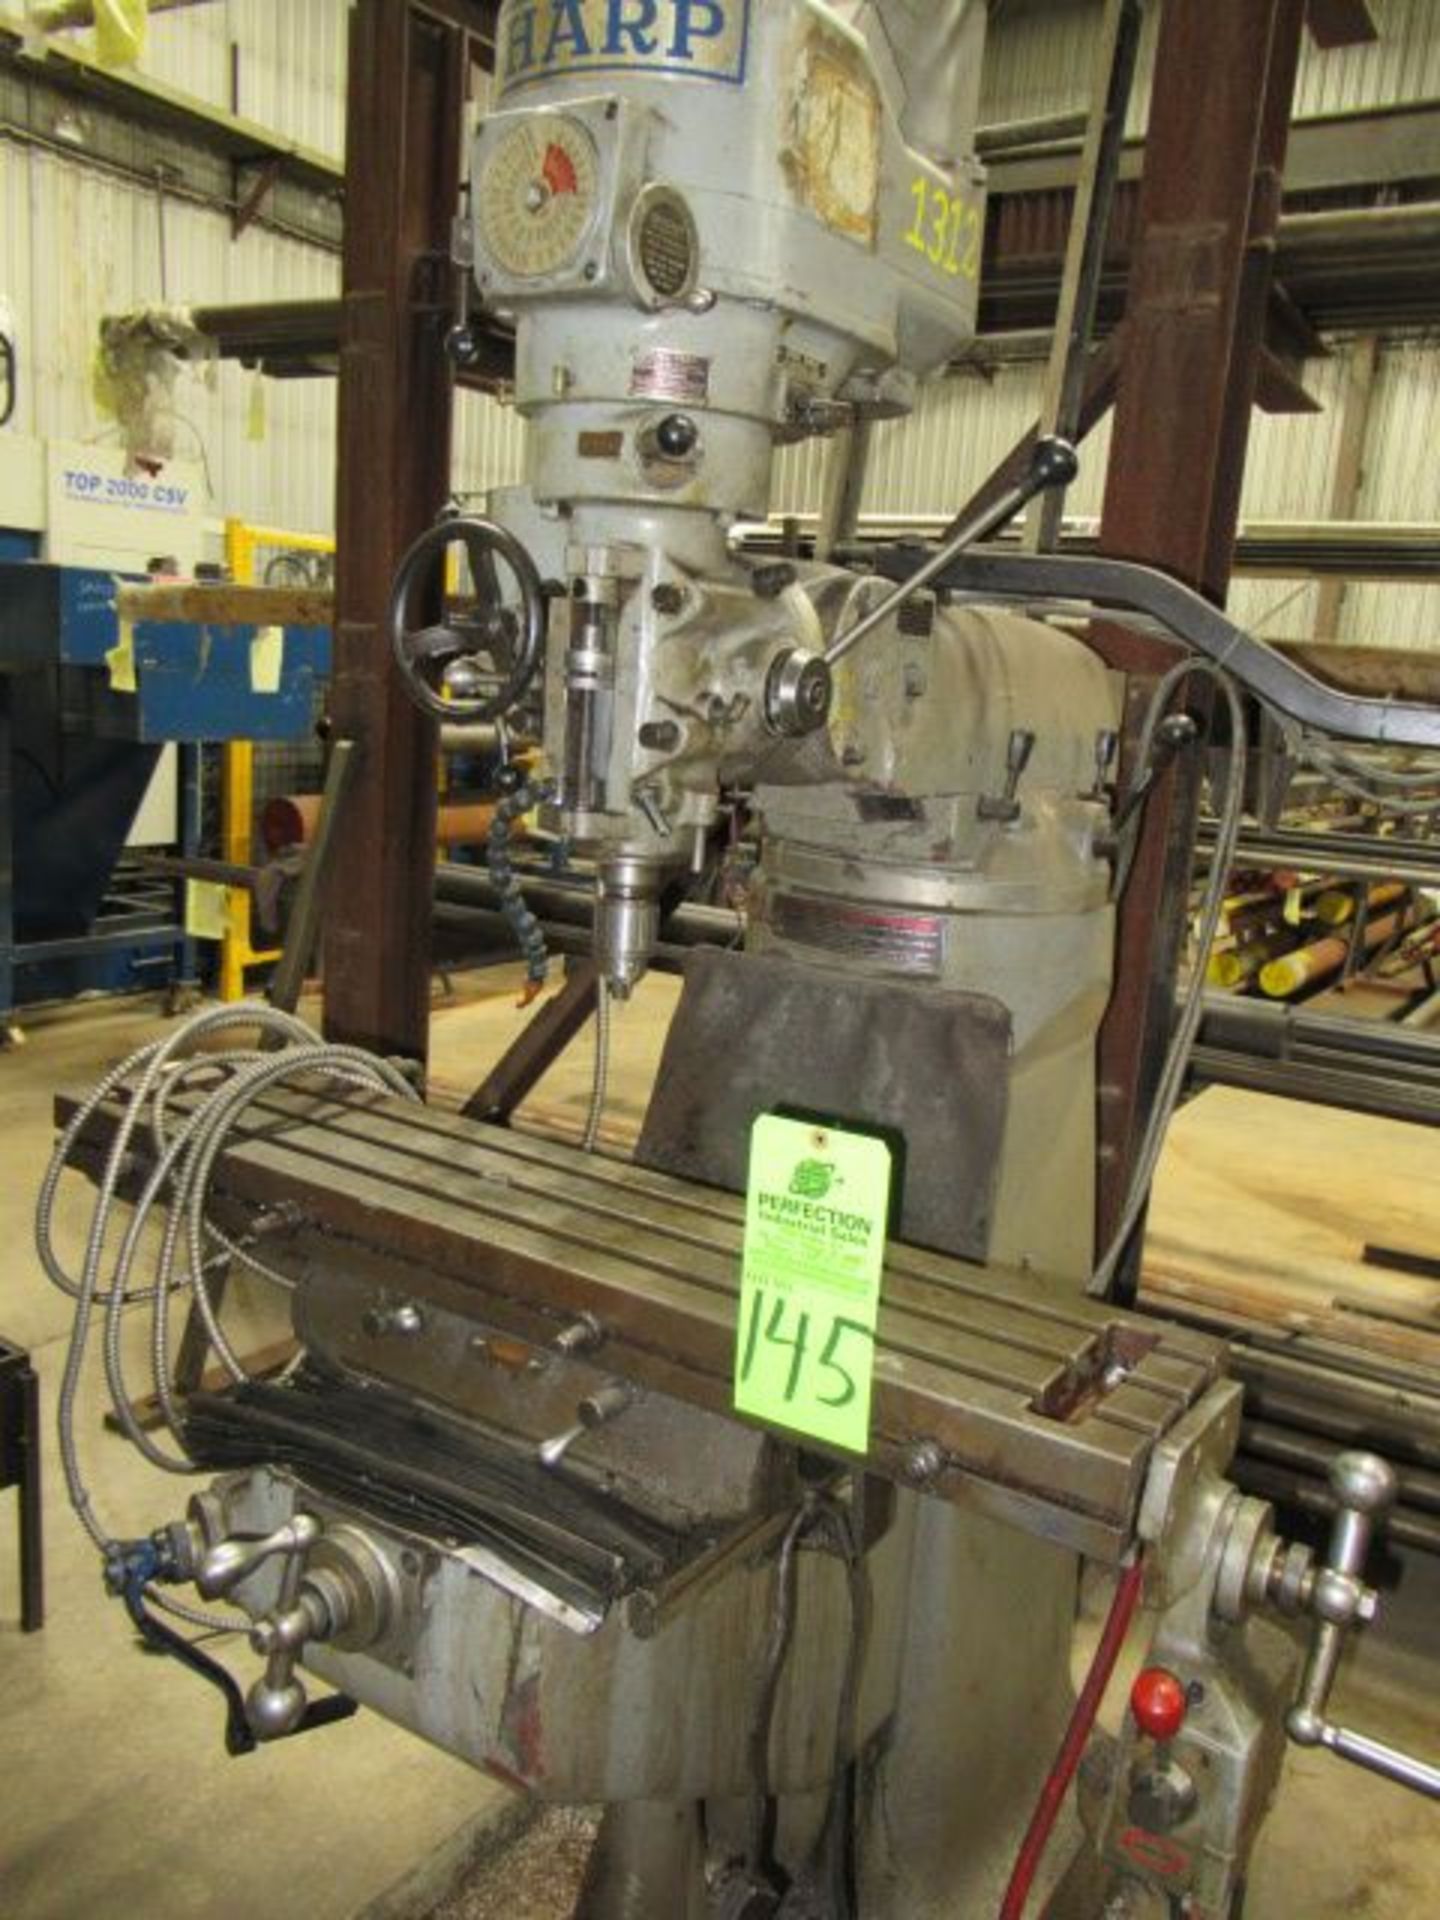 SHARPE 2 hp Vertical Mill, s/n NA, w/ Power Feed Table ($75 Rigging Cost) - Image 2 of 3